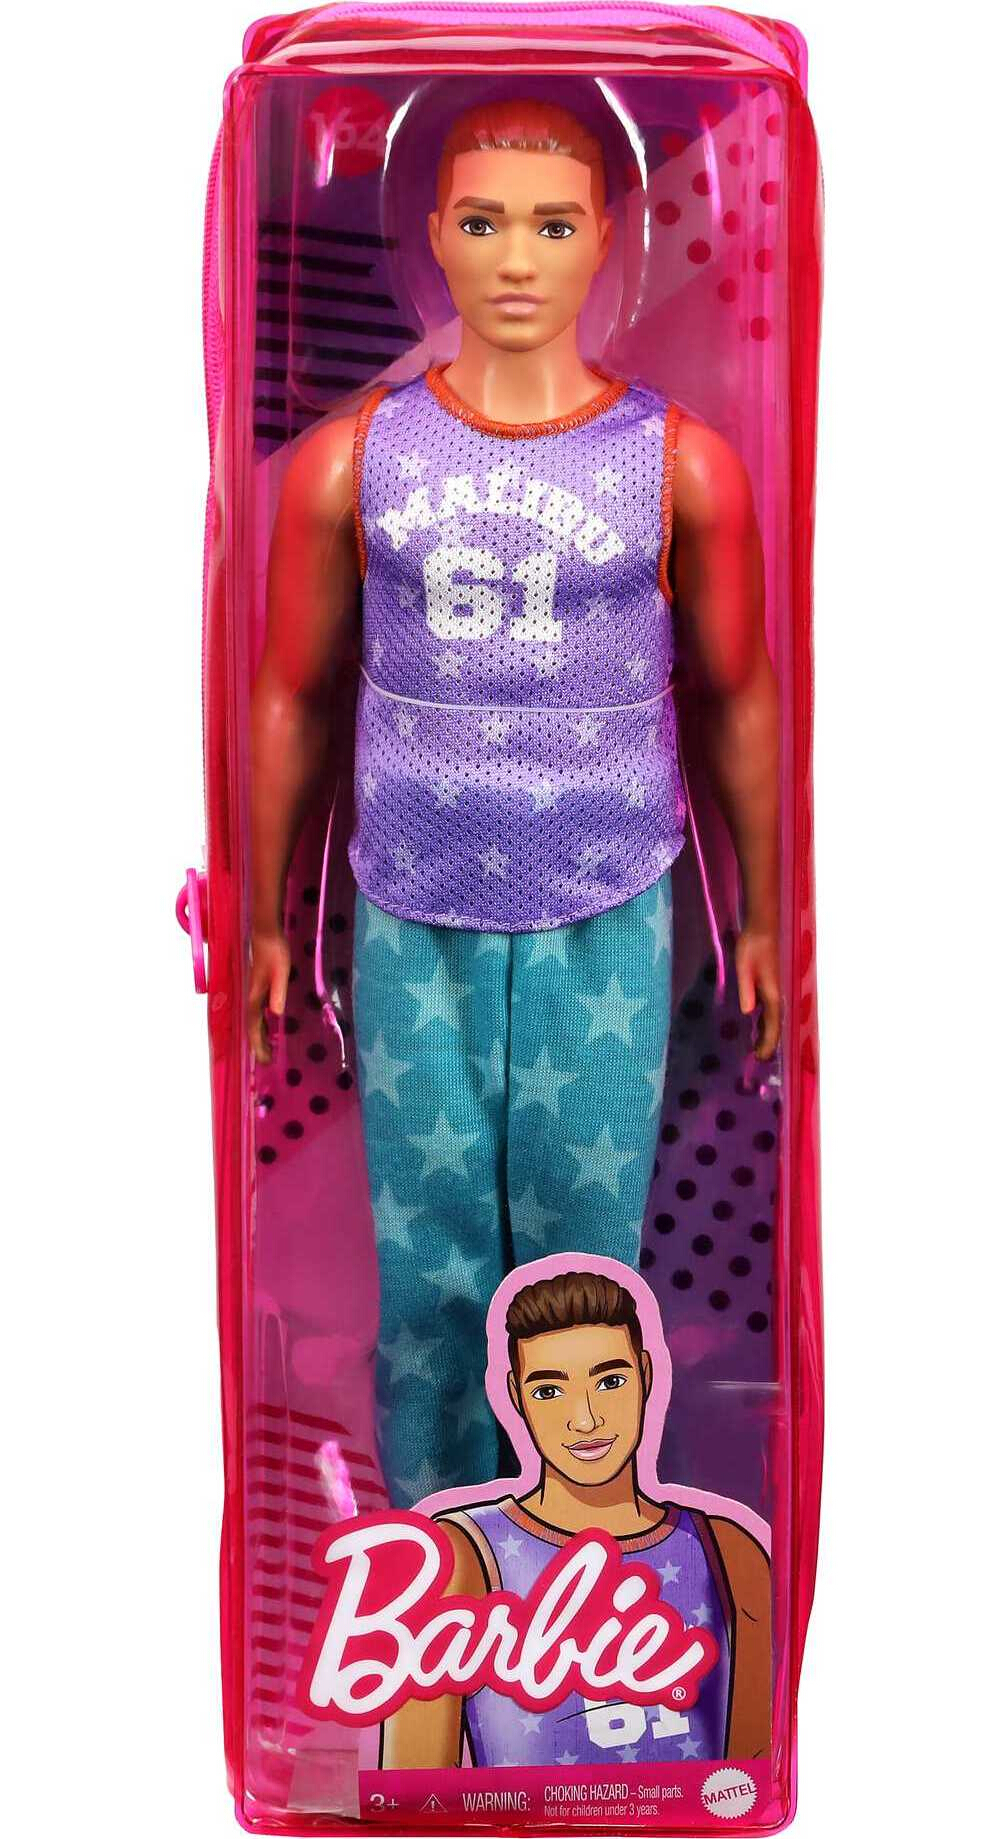 Barbie Ken Fashionistas Doll #165 with Sculpted Brown Hair & Athleisure-wear - image 7 of 7